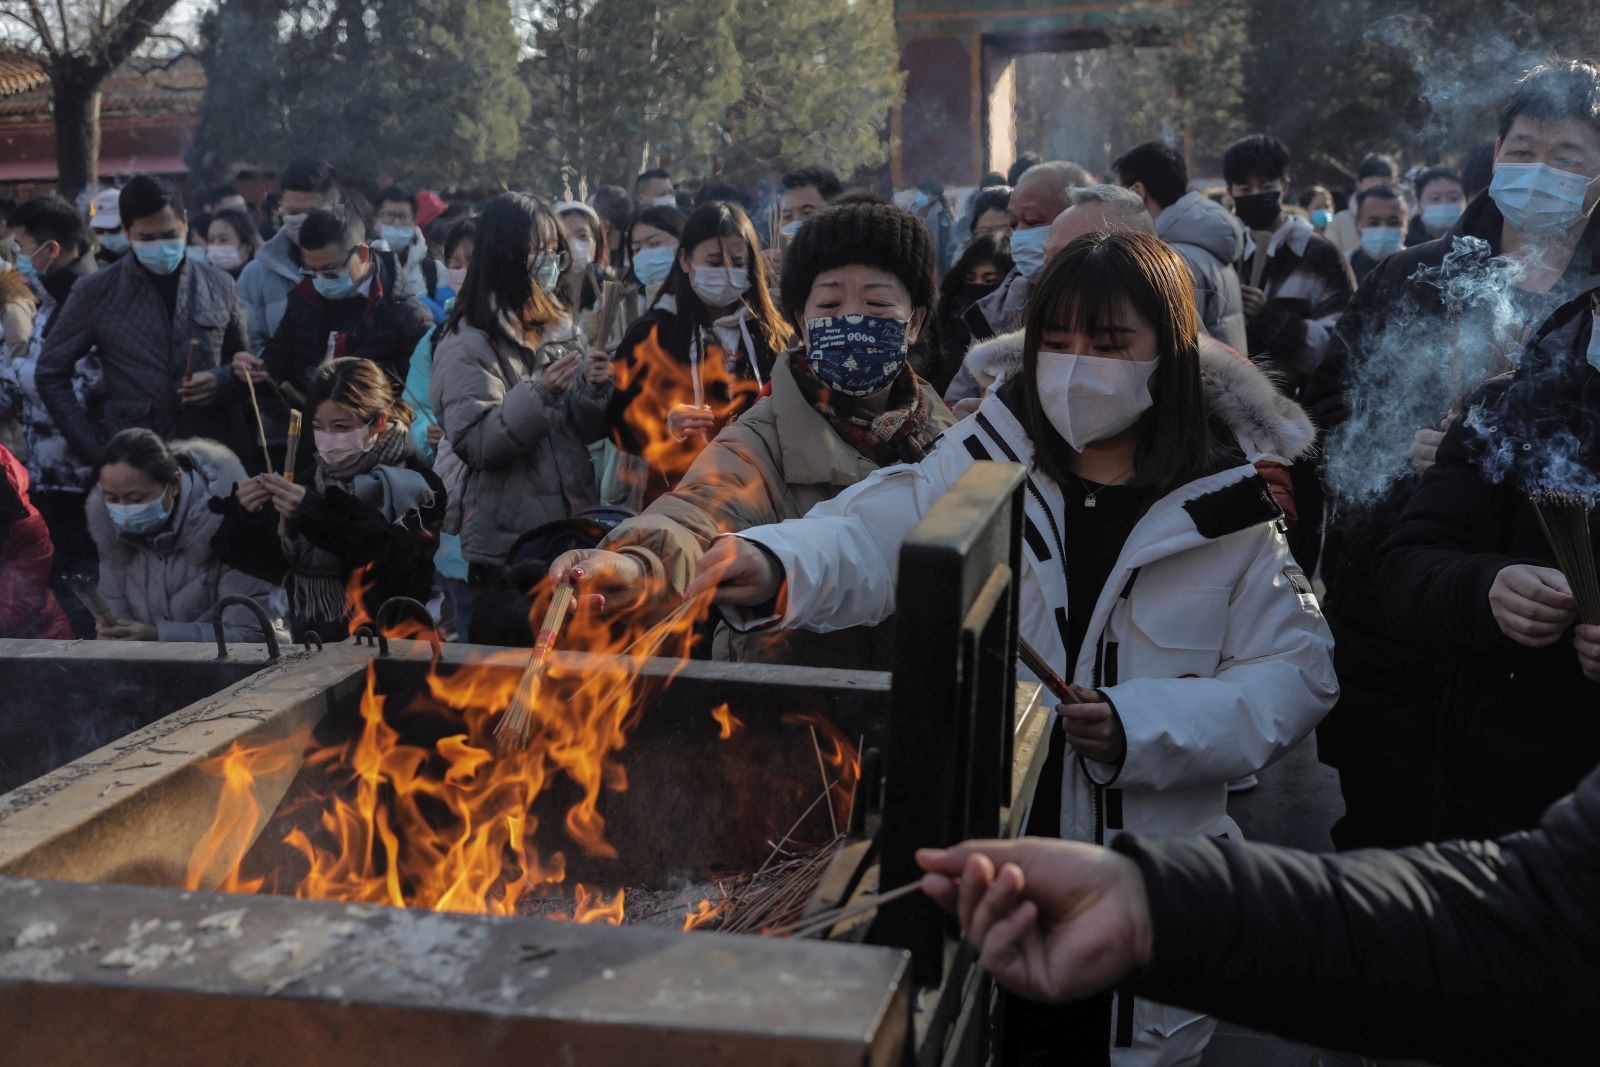 epa09662333 People gather to burn incense sticks while praying for good wishes on New Year's Day at the Yonghegong Lama Temple in Beijing, China, 01 January 2022. Many cities in China canceled New Year's Eve celebrations amid rising concerns over the coronavirus disease (COVID-19) pandemic.  EPA/WU HONG